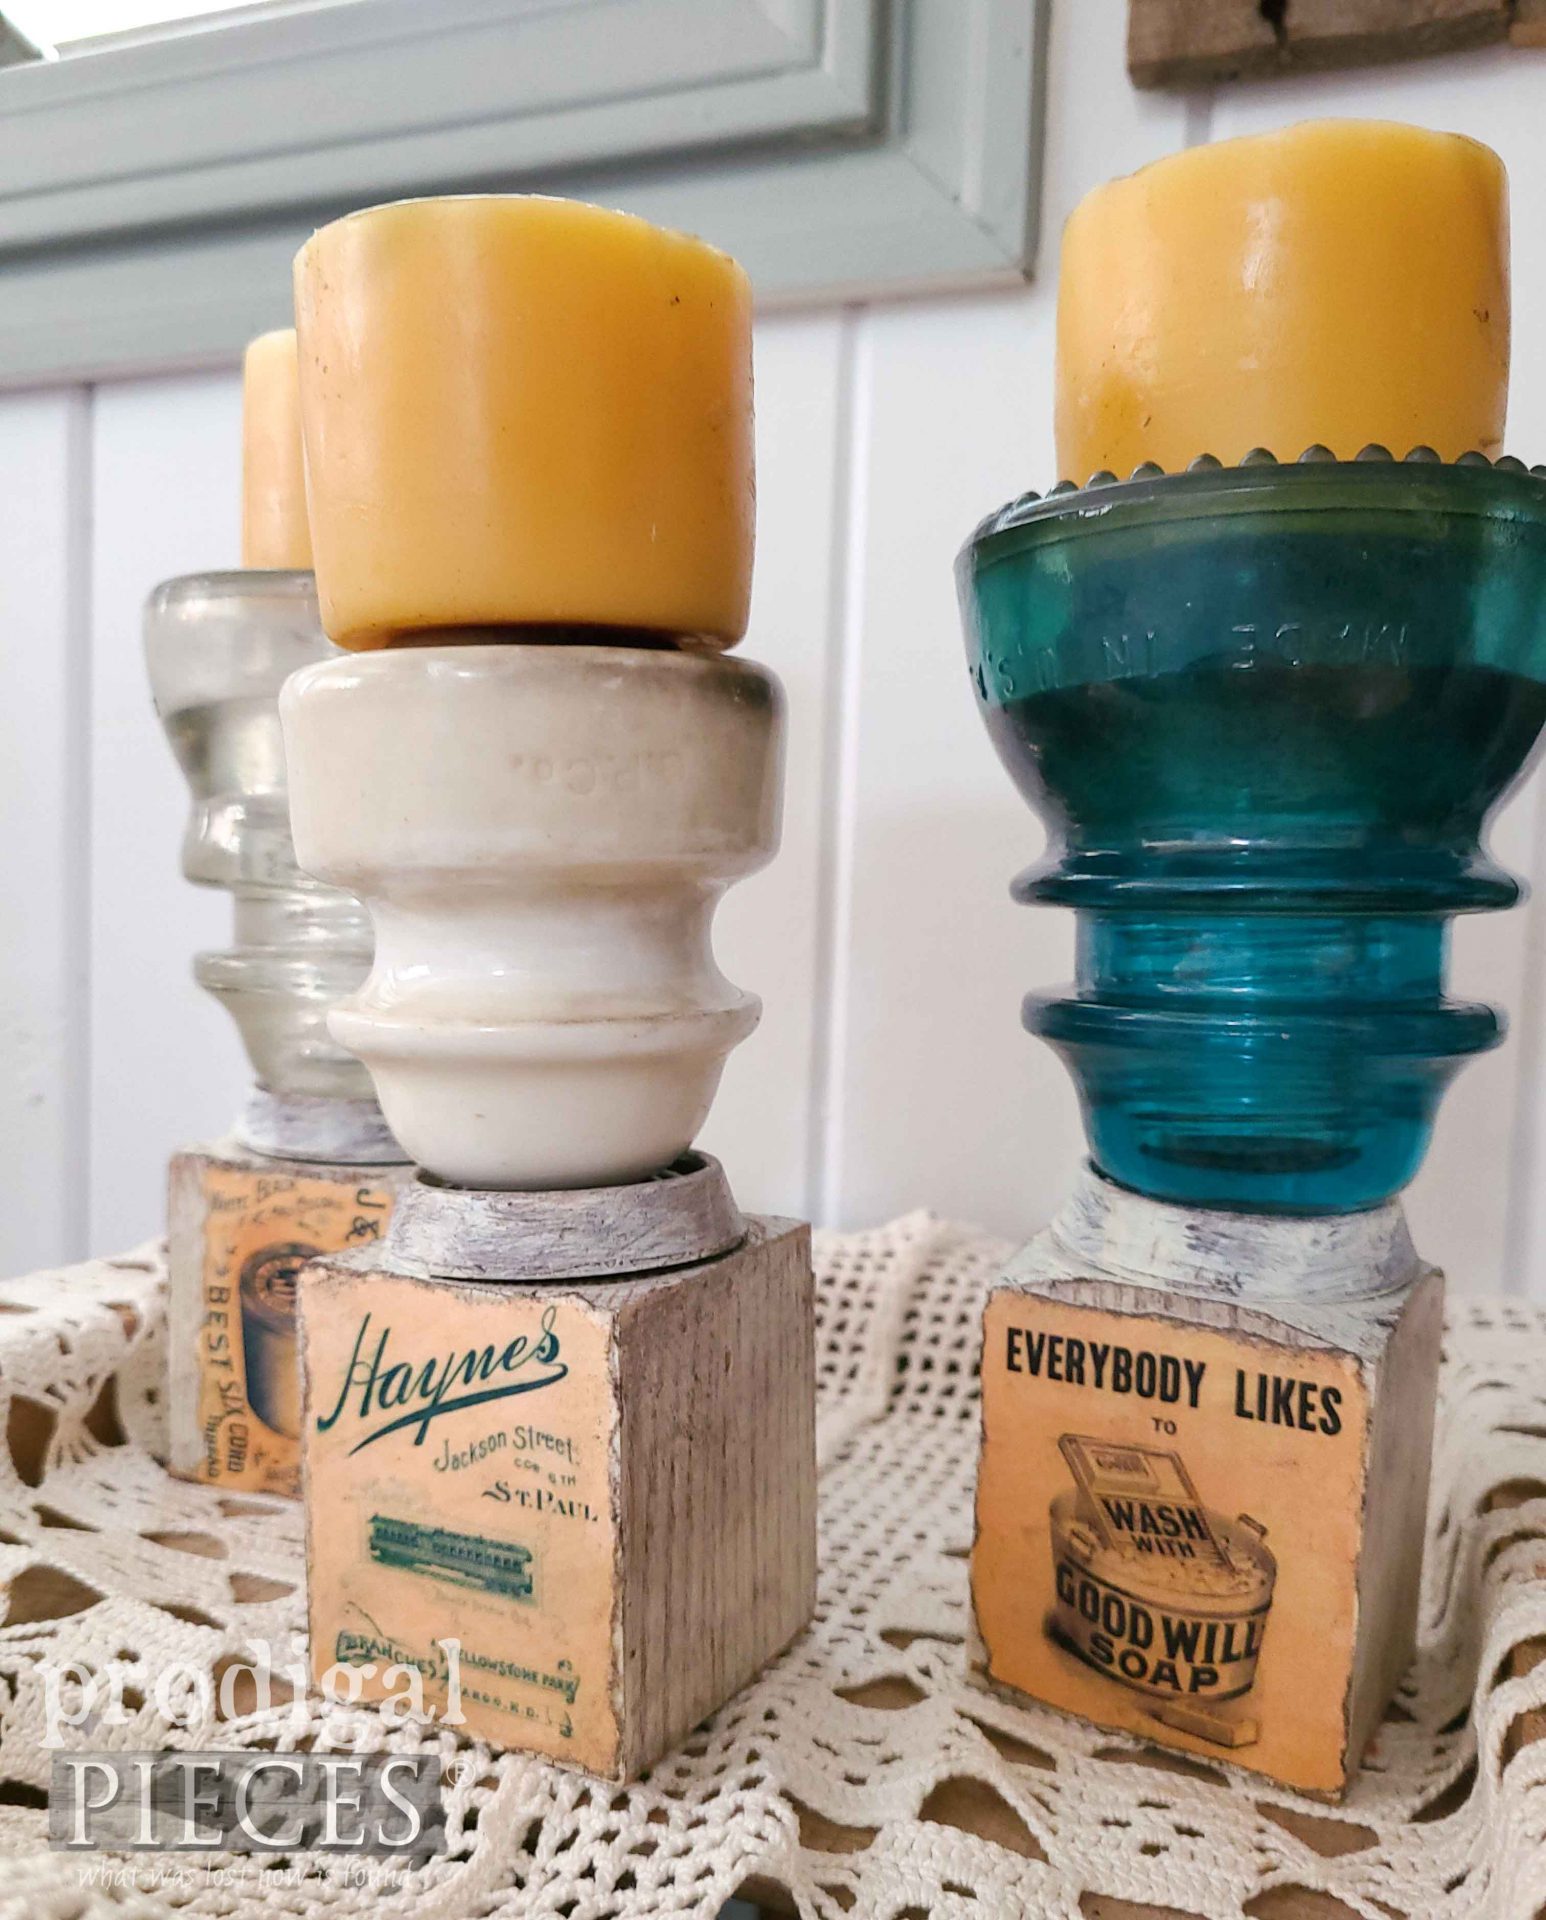 Farmhouse Upcycled Antique Insulator Candle Holders by Larissa of Prodigal Pieces | prodigalpieces.com #prodigalpieces #farmhouse #diy #rustic #handmade